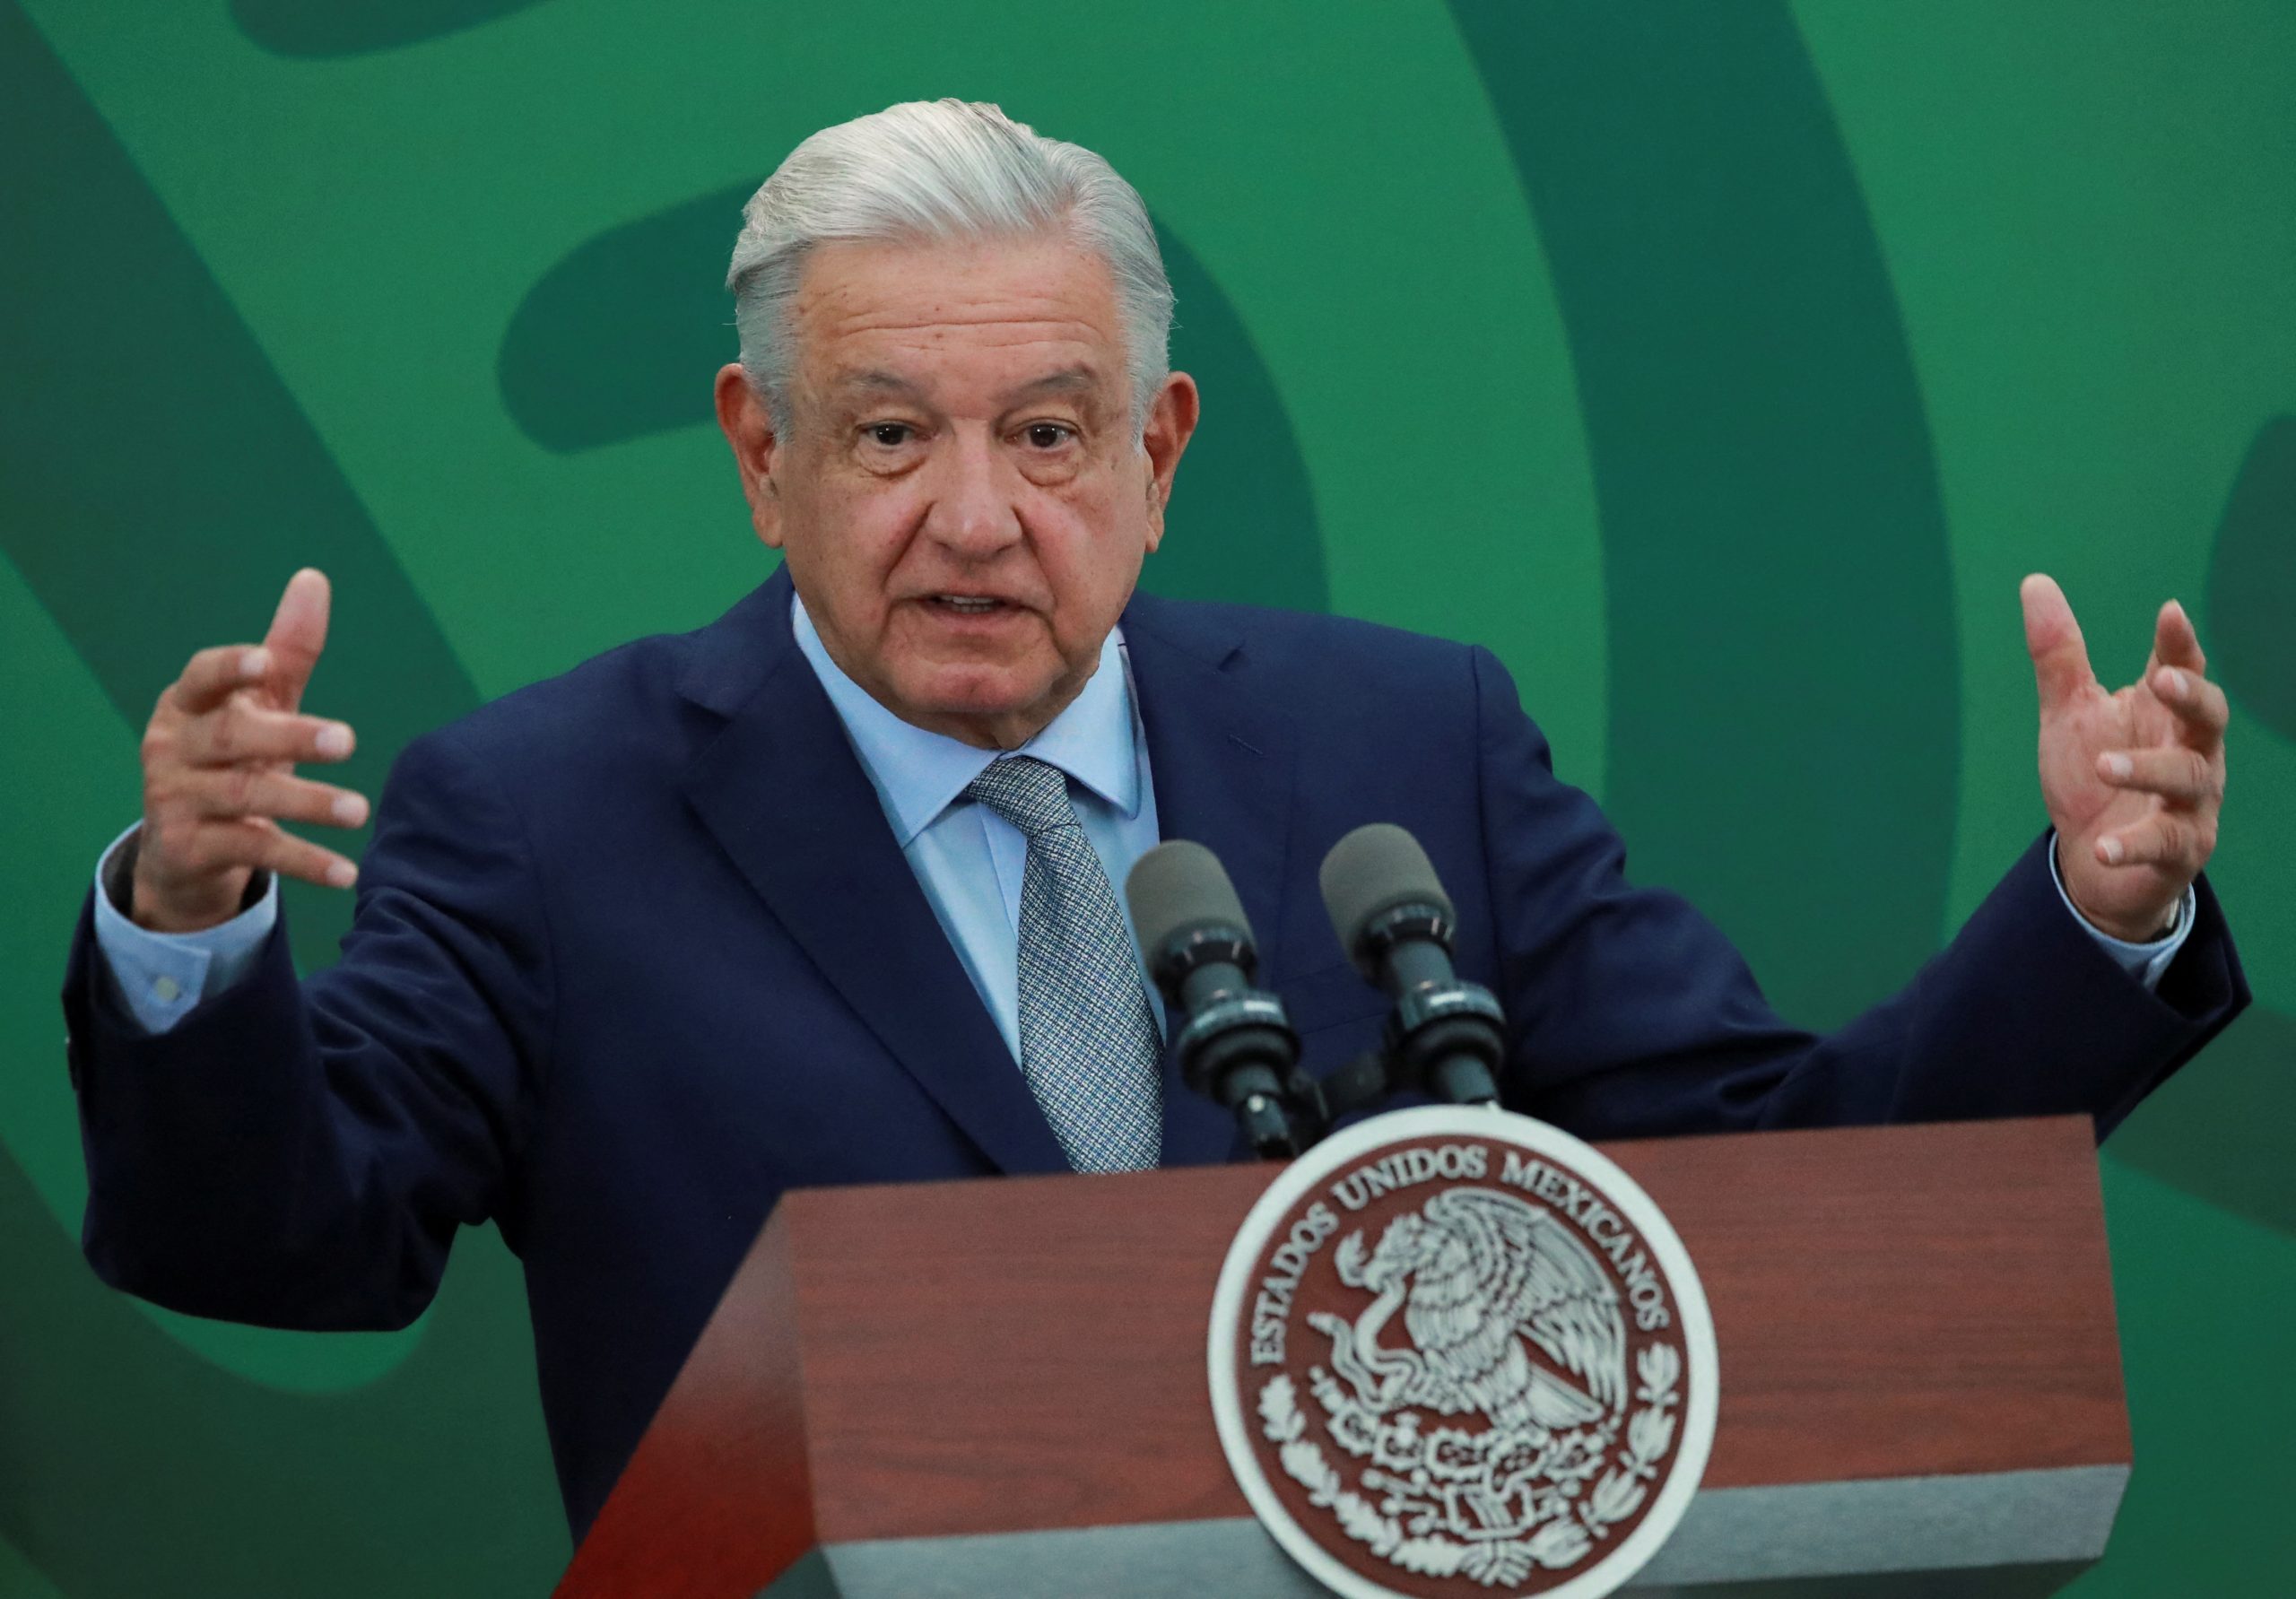 Mexico’s president weaponizes narratives against media to combat criticism